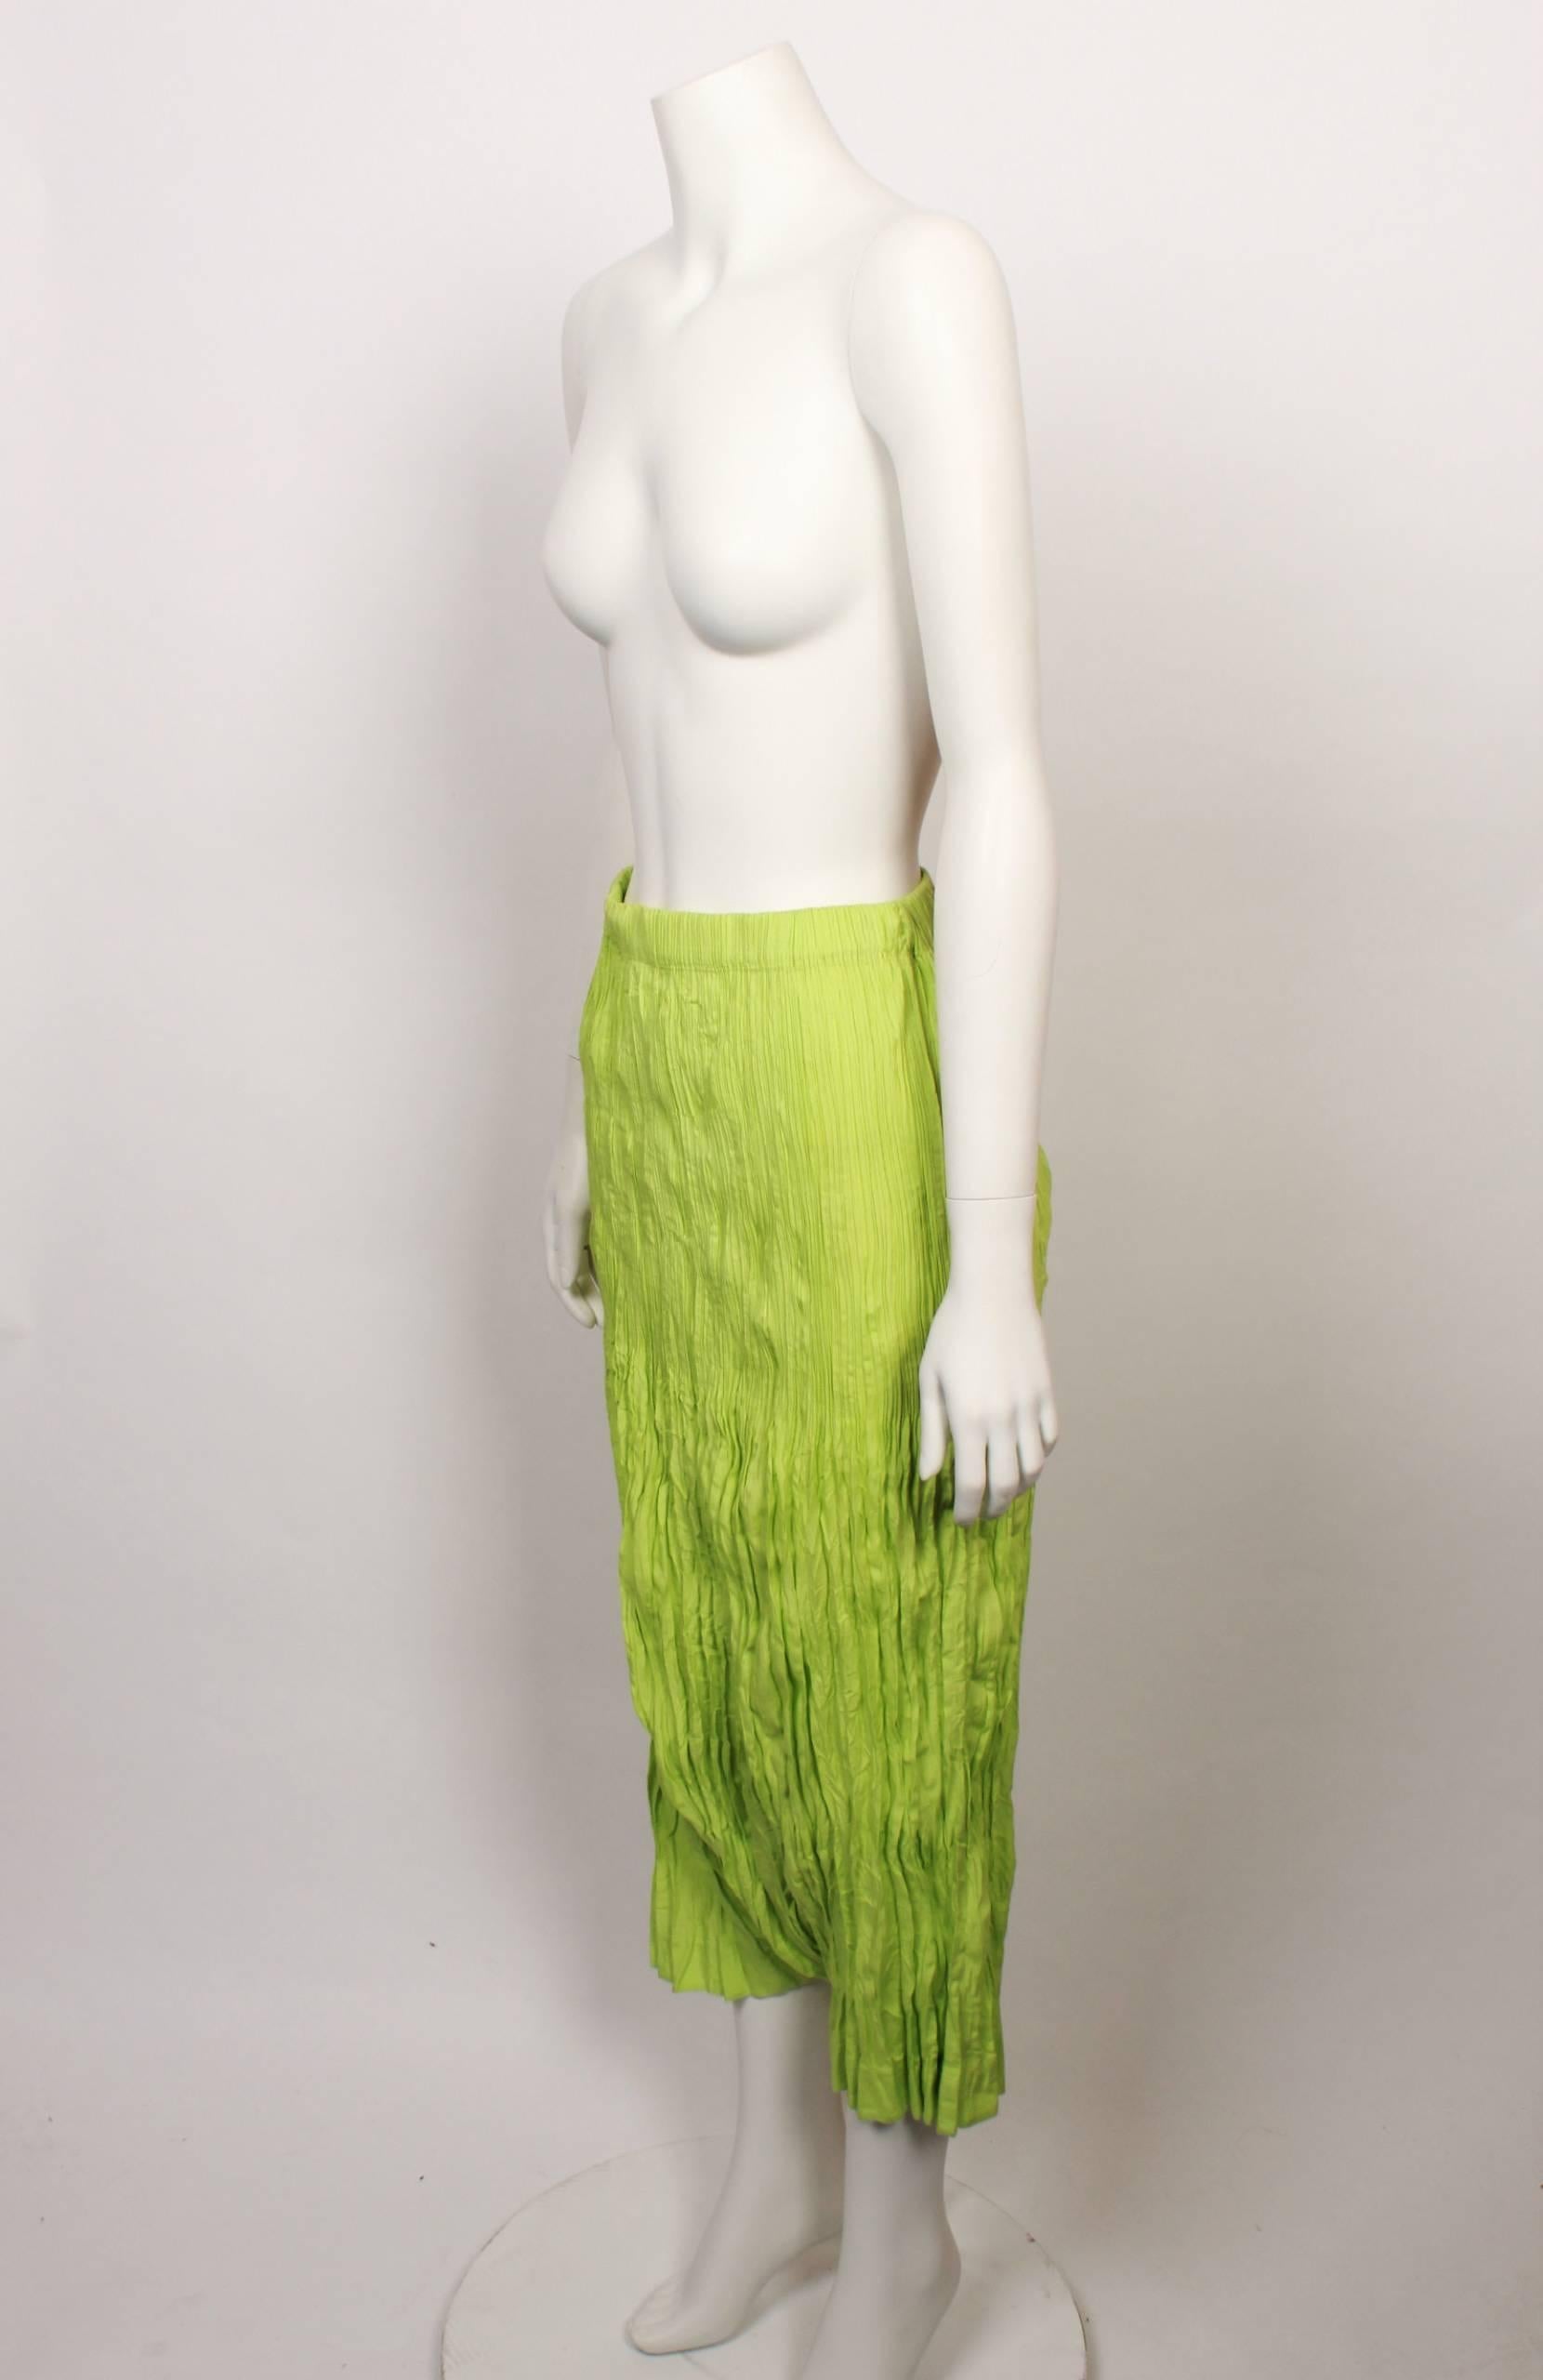 1990s Issey Miyake 3/4 length lime green drop crotch pants with elasticated waist in iconic Issey Miyake pleats. 
Fabric is stretchy and measurements are with garment flat and un-stretched. 
